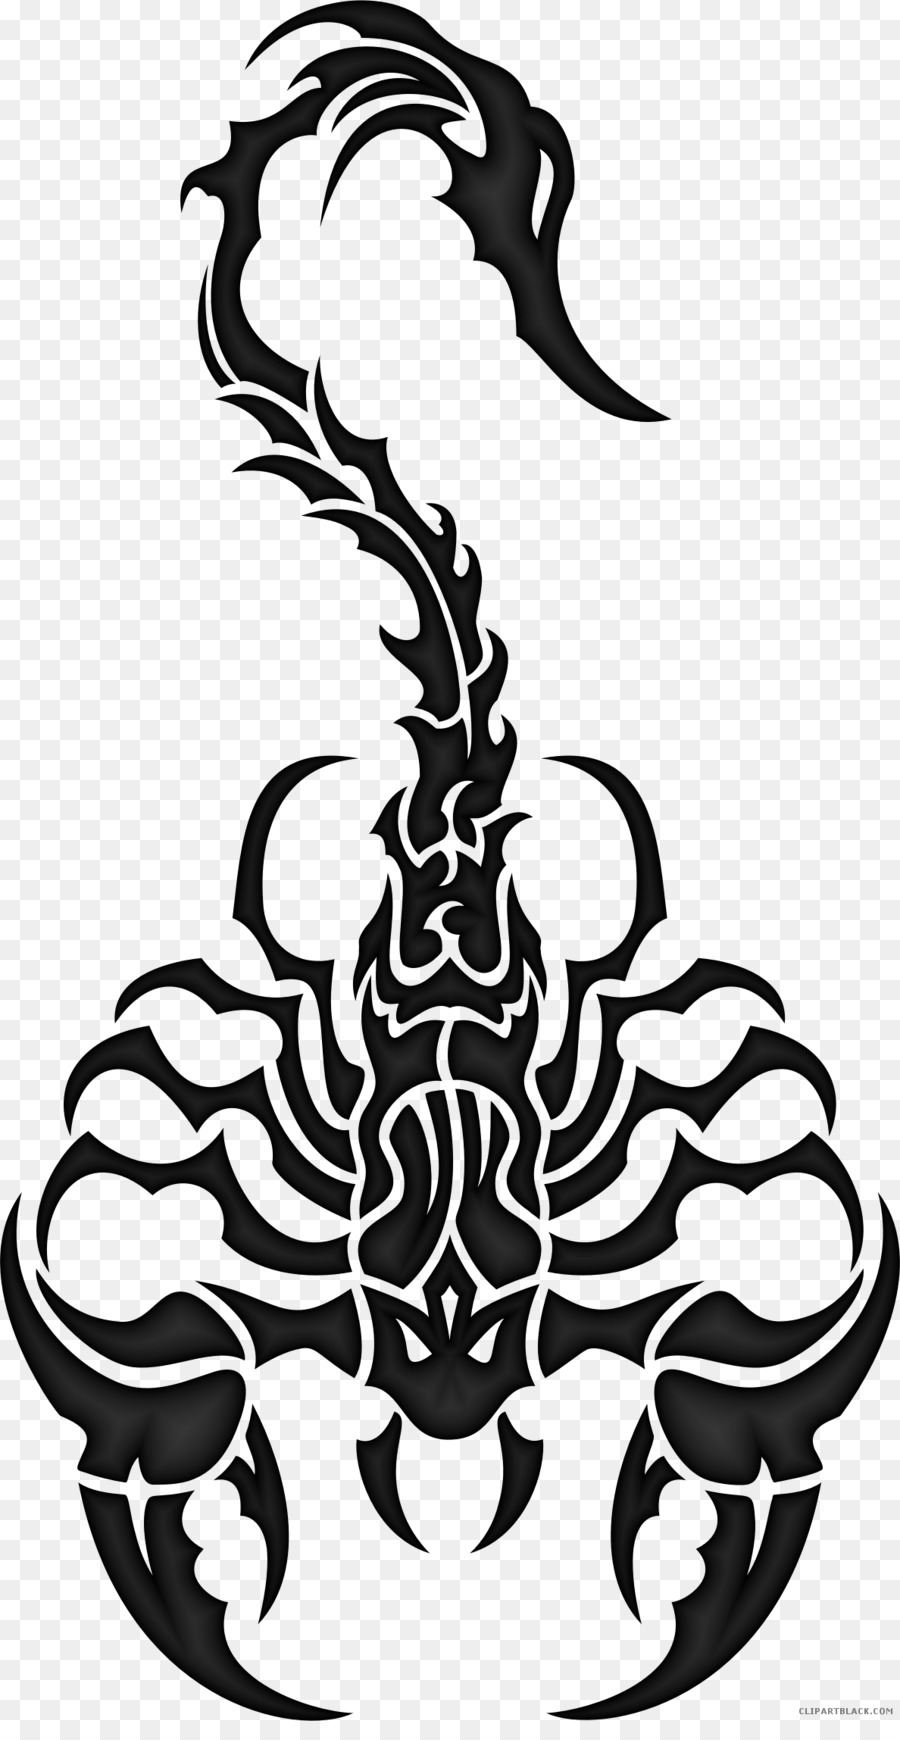 Scorpion Black And White png download.